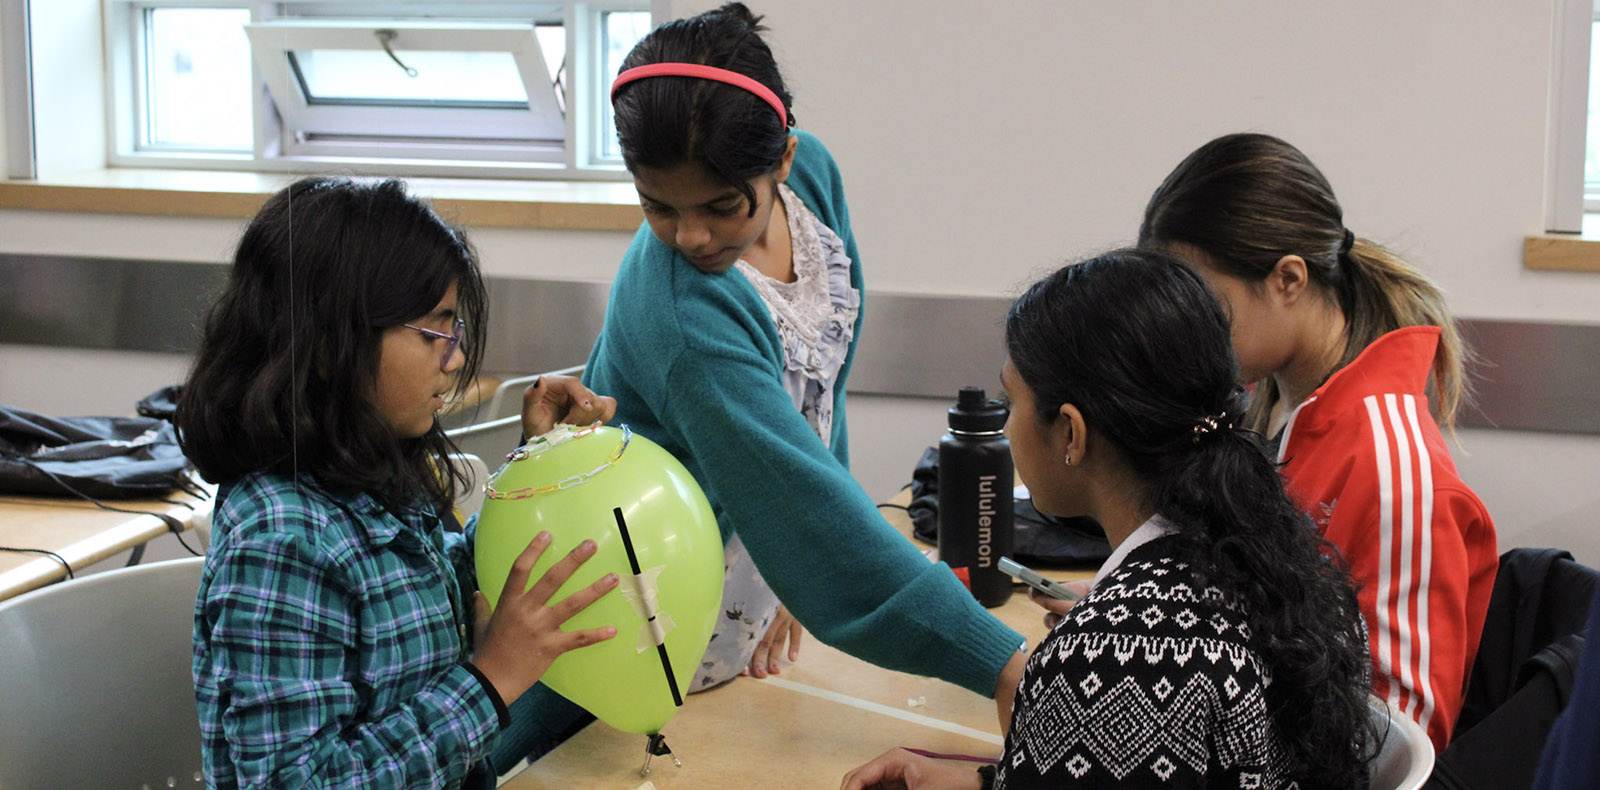 Youth working on a STEM activity with a balloon